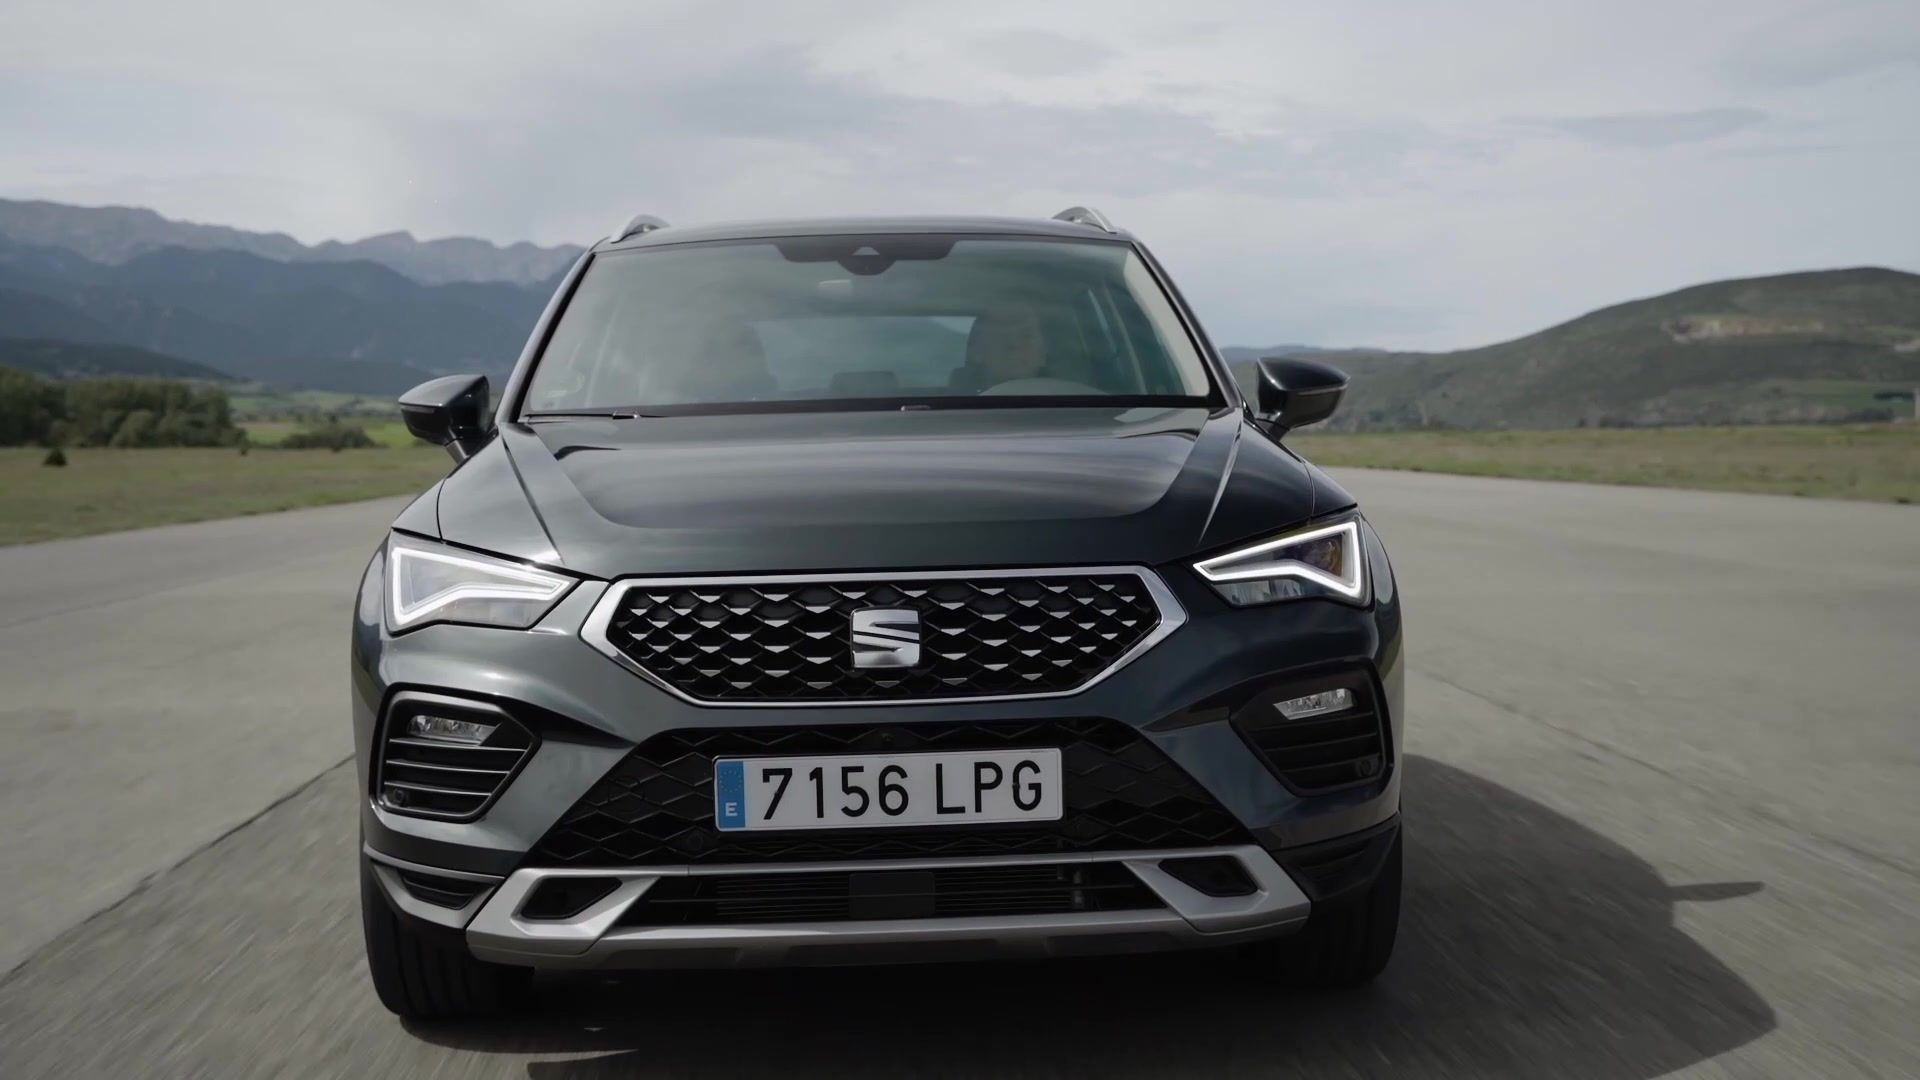 The SEAT Ateca - Off-road capable and elegant